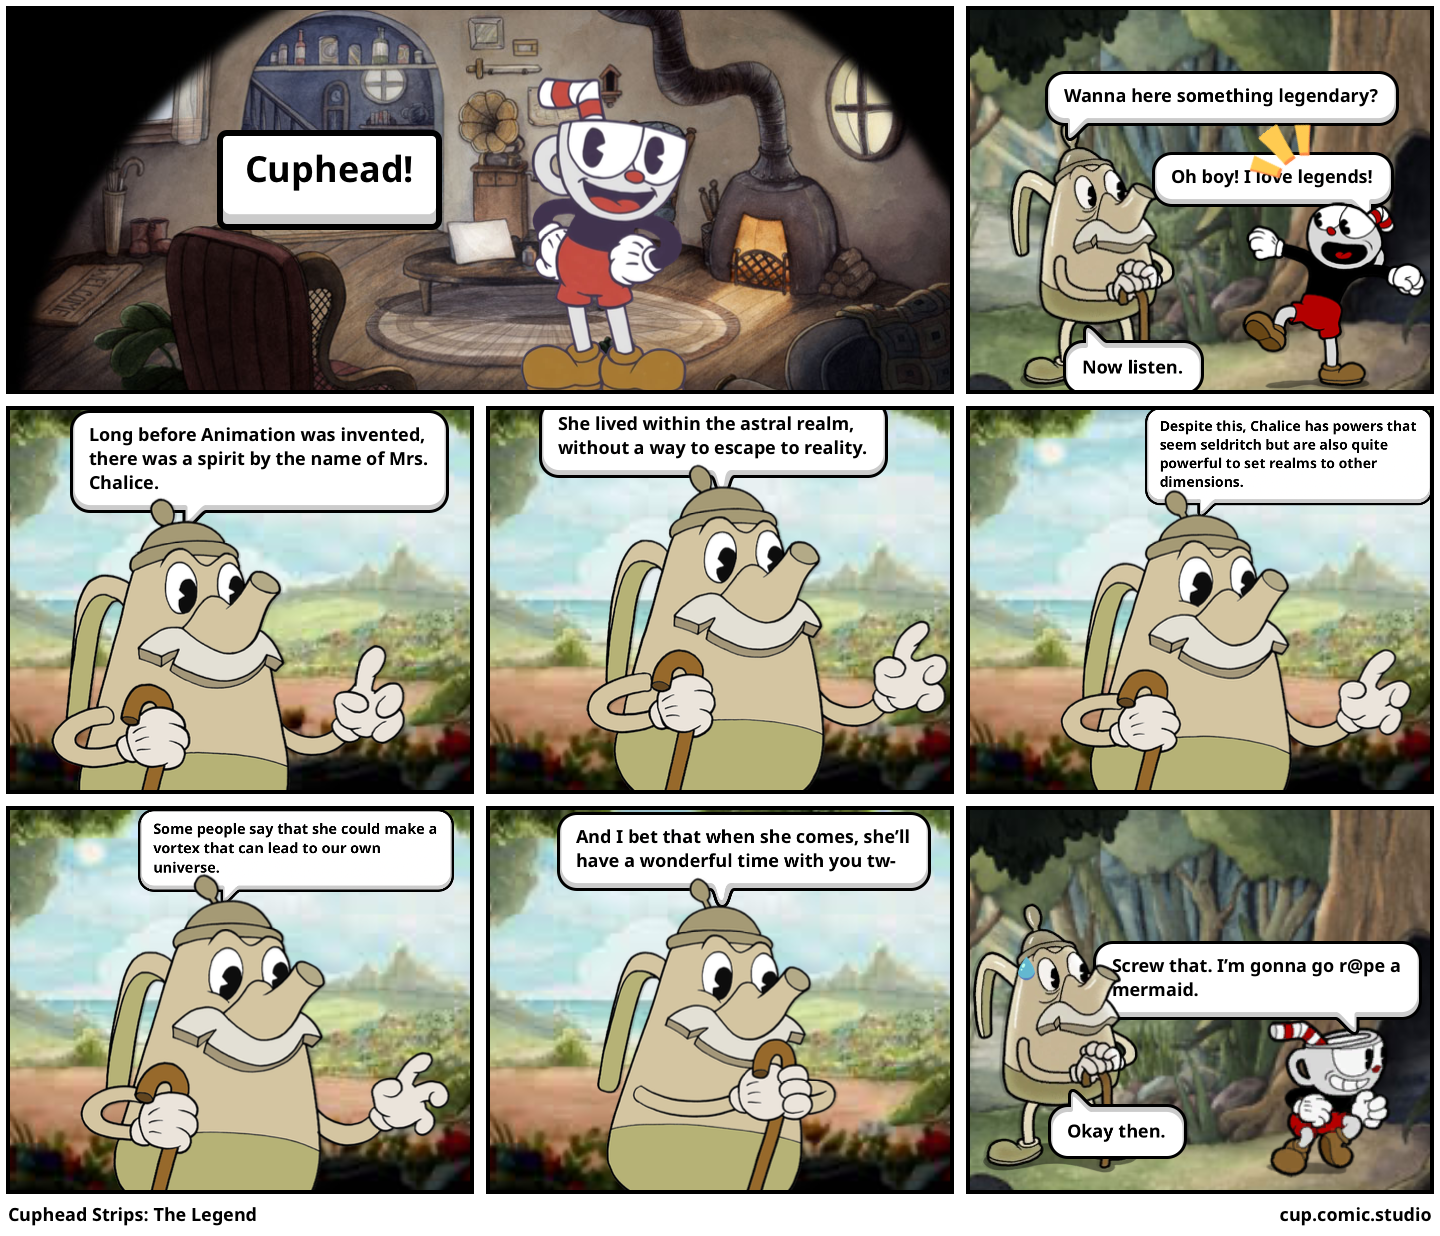 Cuphead Strips: The Legend